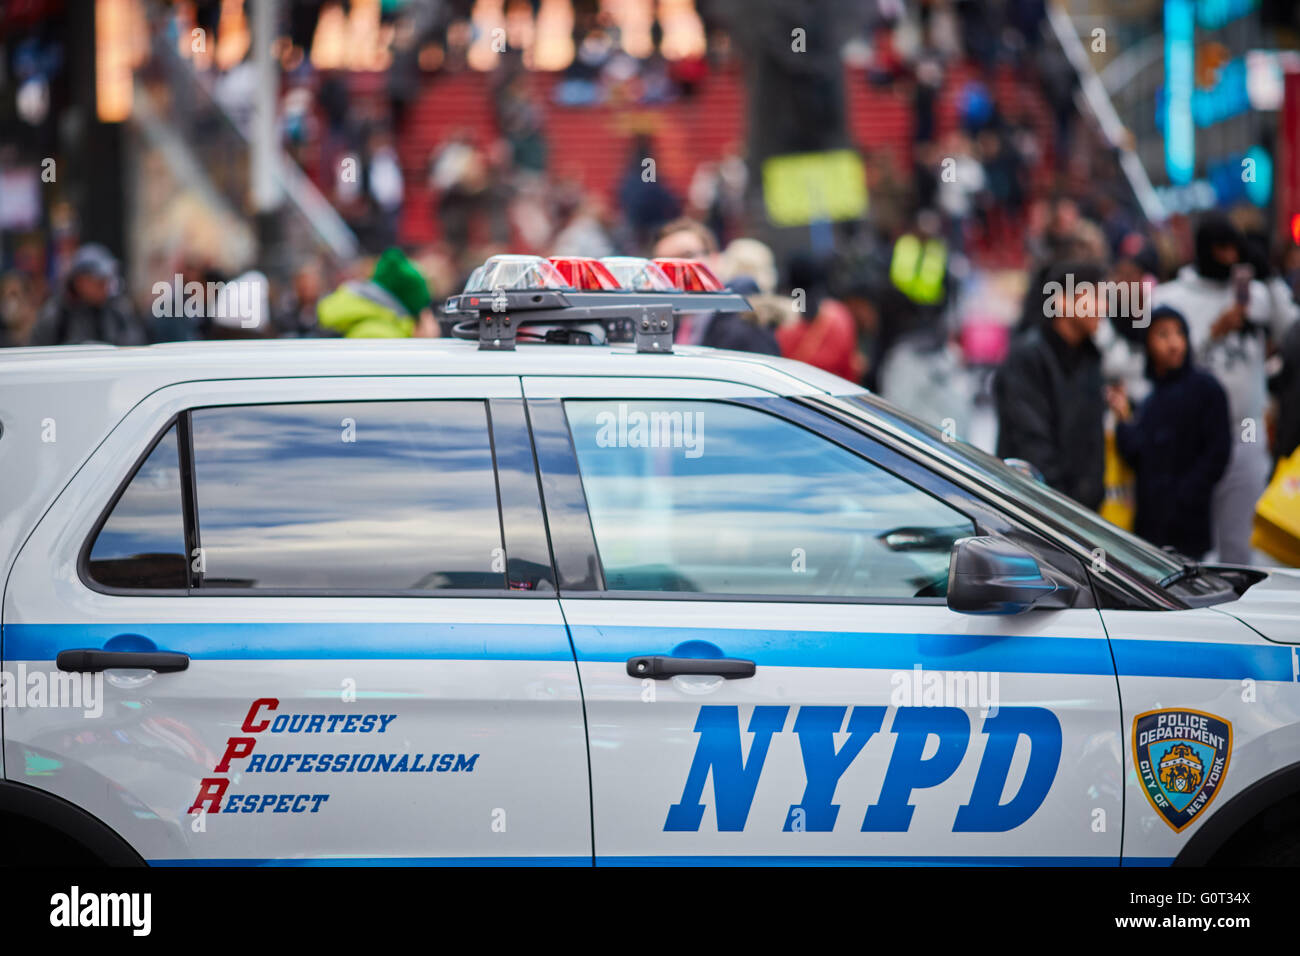 New York Times Square, Broadway Professionnalisme Respect courtois NYPD suv voiture close up bleu blanc policier pcso p.c.s.o. Banque D'Images